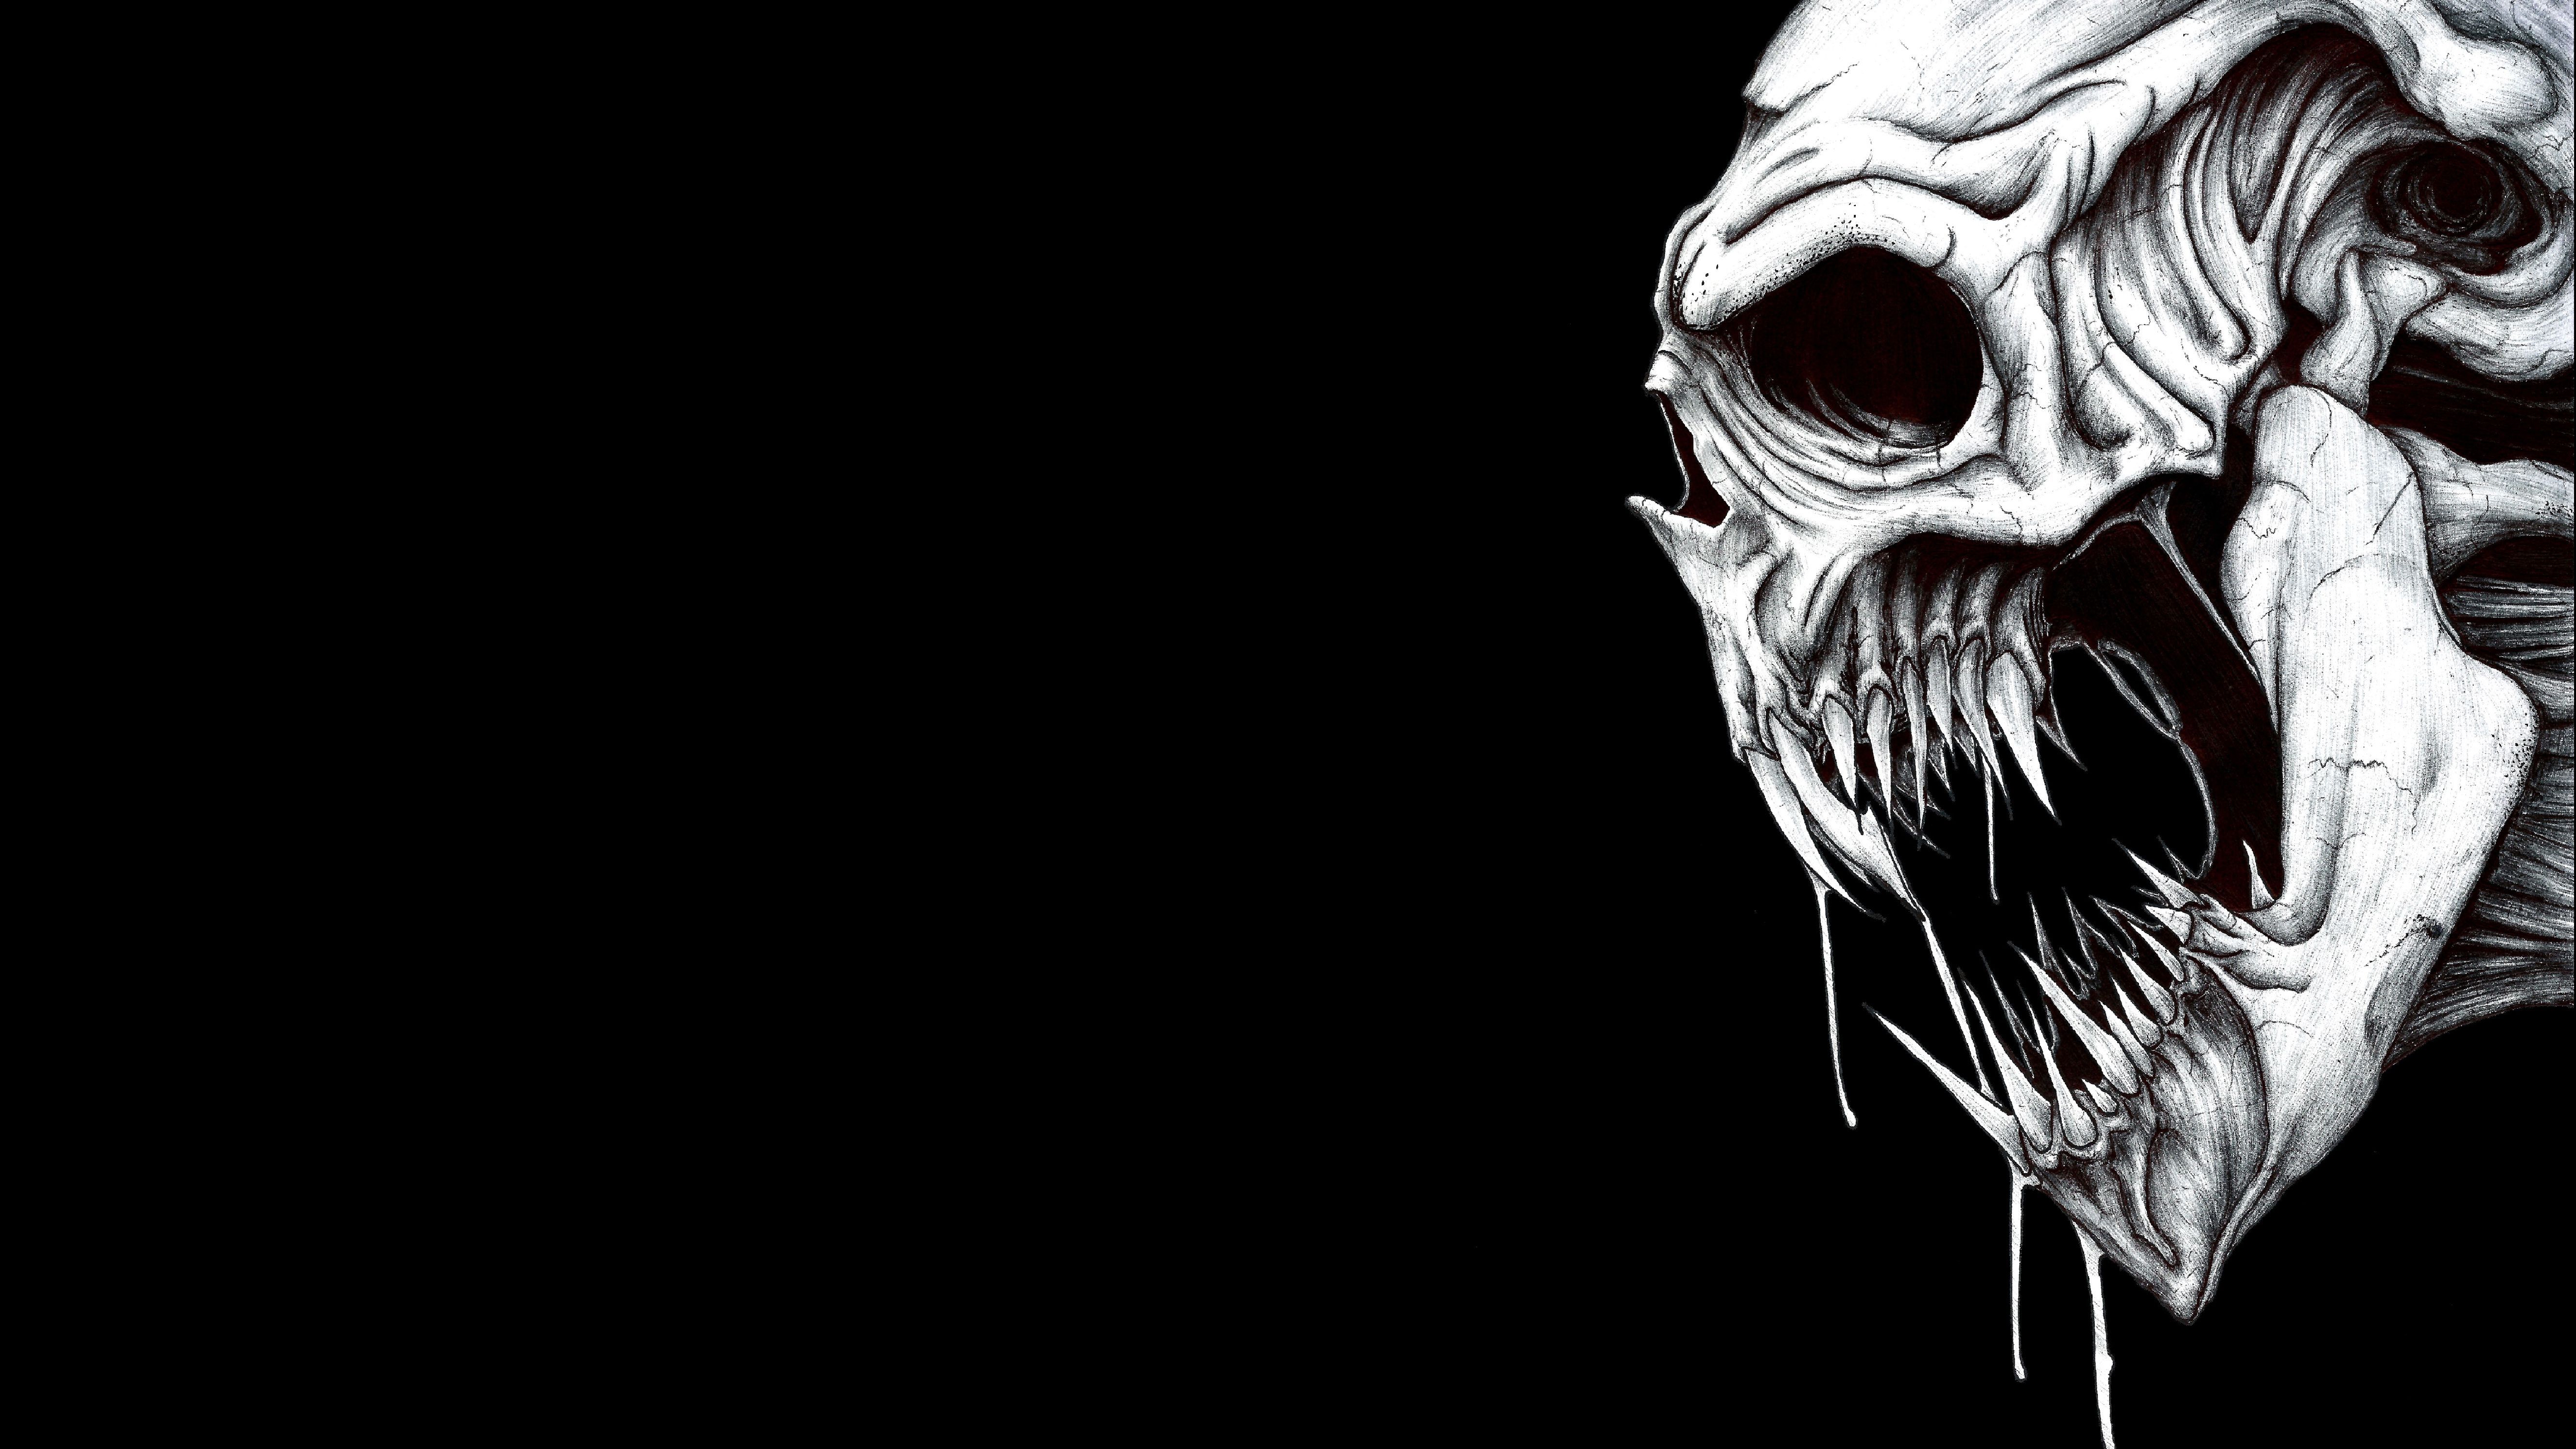 Skull Cool Wallpapers 14527 - HD Wallpapers Site